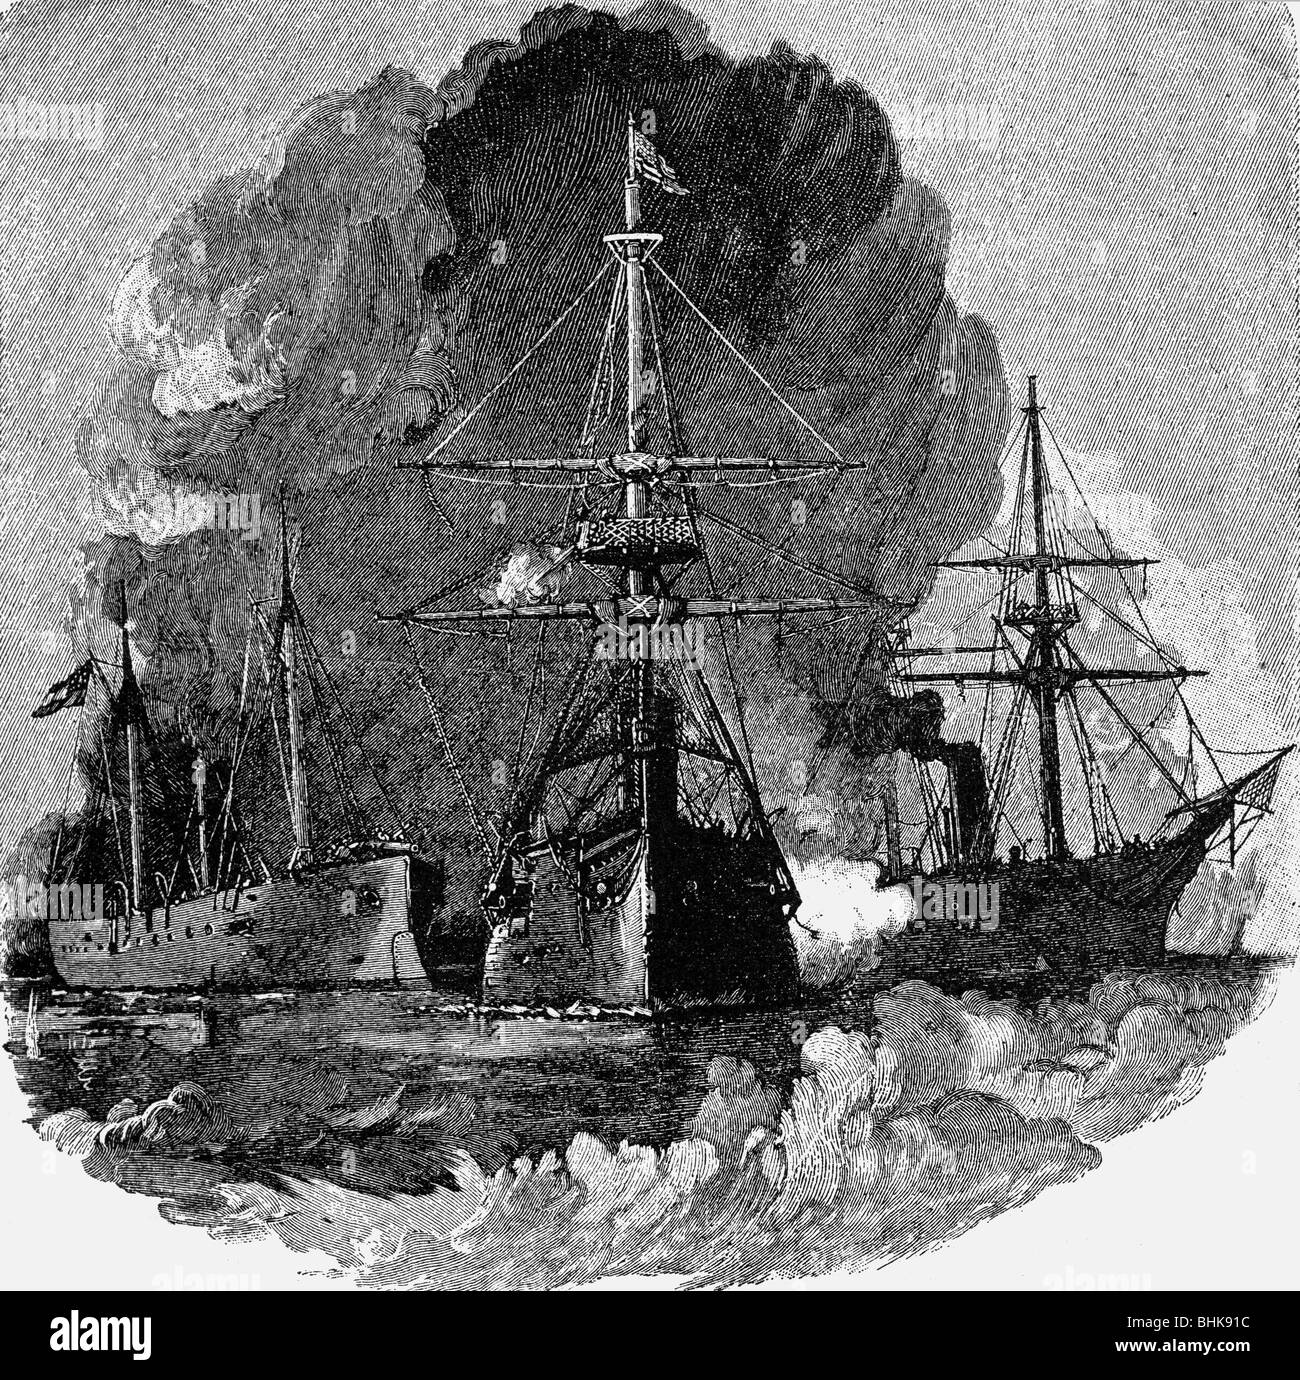 geography / travel, USA, American Civil War 1861 - 1865, Battle of Forts Jackson und St. Philip, Louisiana, 18.- 28.4.1862, breakthrough of the USS 'Iroquis', 24.4.1862, wood engraving, 19th century, , Stock Photo